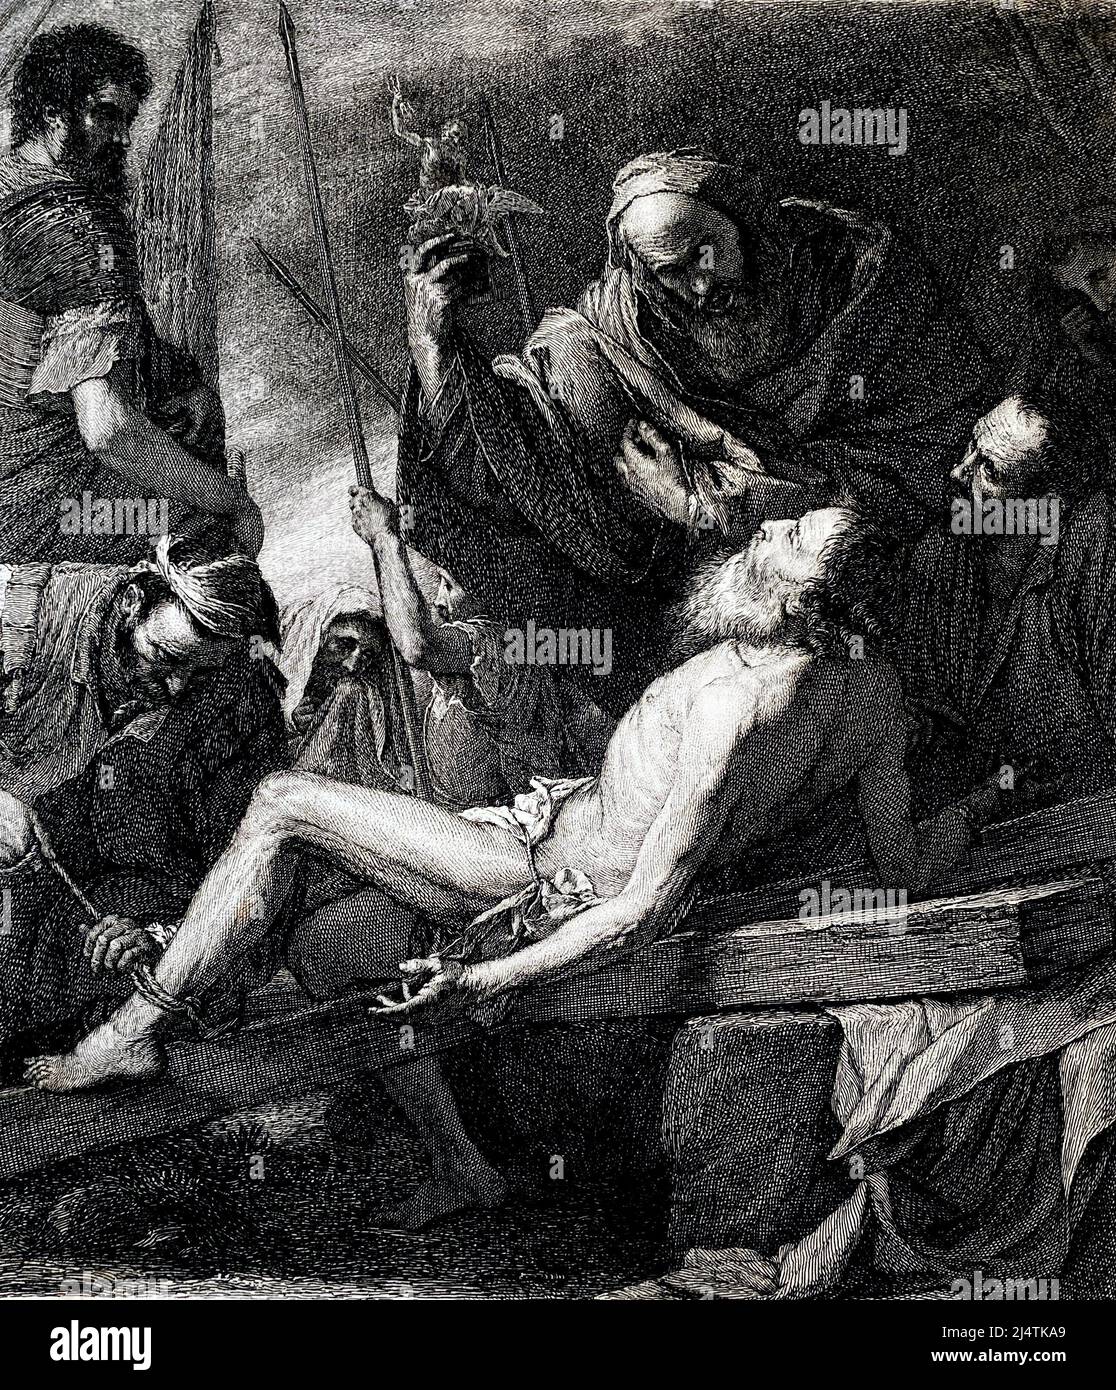 'The Martyrdom of St. Andrew, engraving by E. Doby from an oil painting by Jusepede Ribera, 1628, from the George Barrie Collection, The International Gallery 1800s. Stock Photo